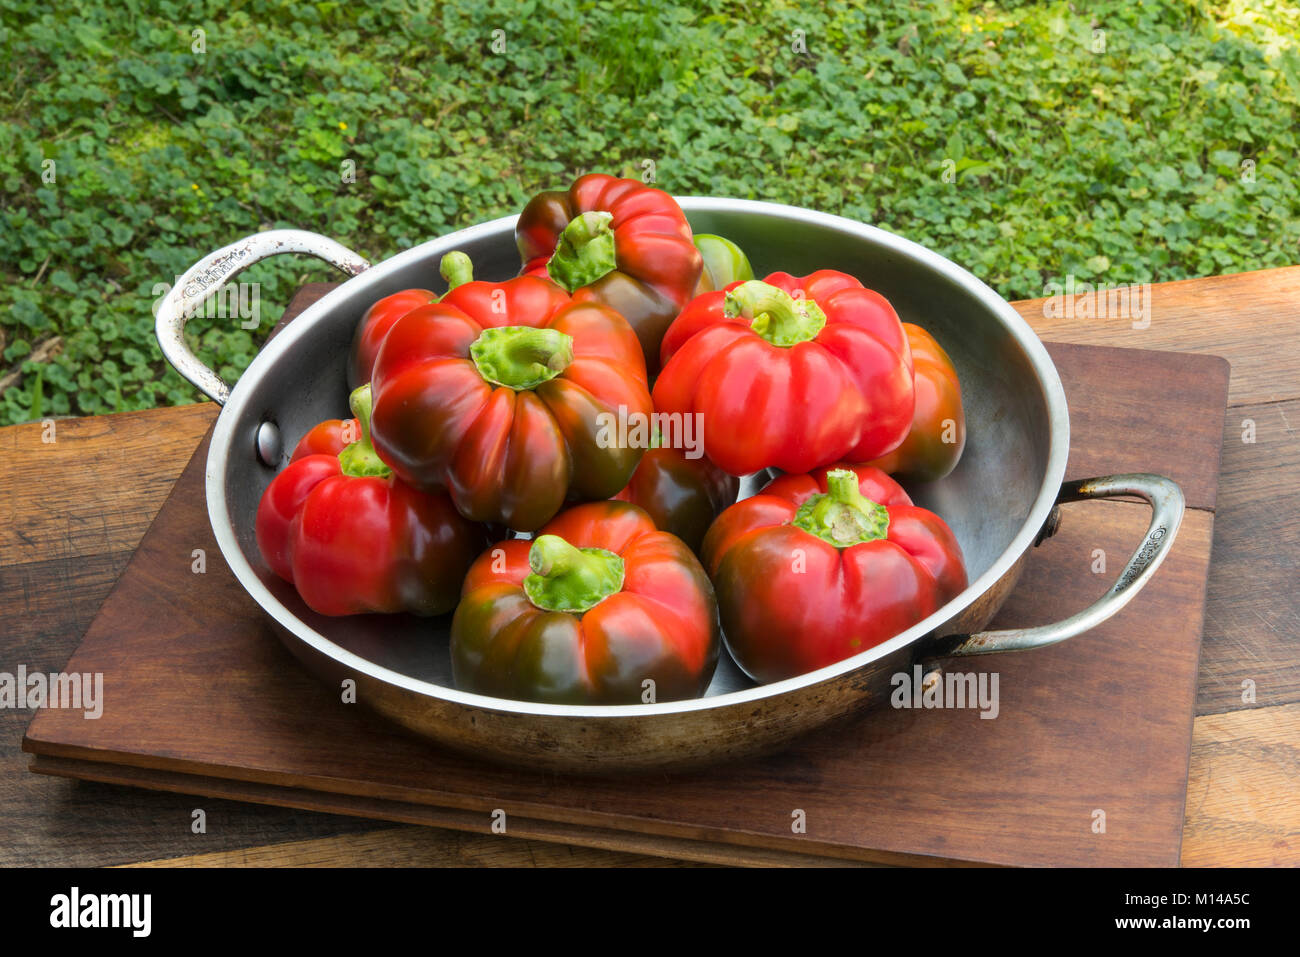 Figaro heritage swtt peppers have the same shape as little pumpkins,  They ripen from green to red on the vine. Stock Photo